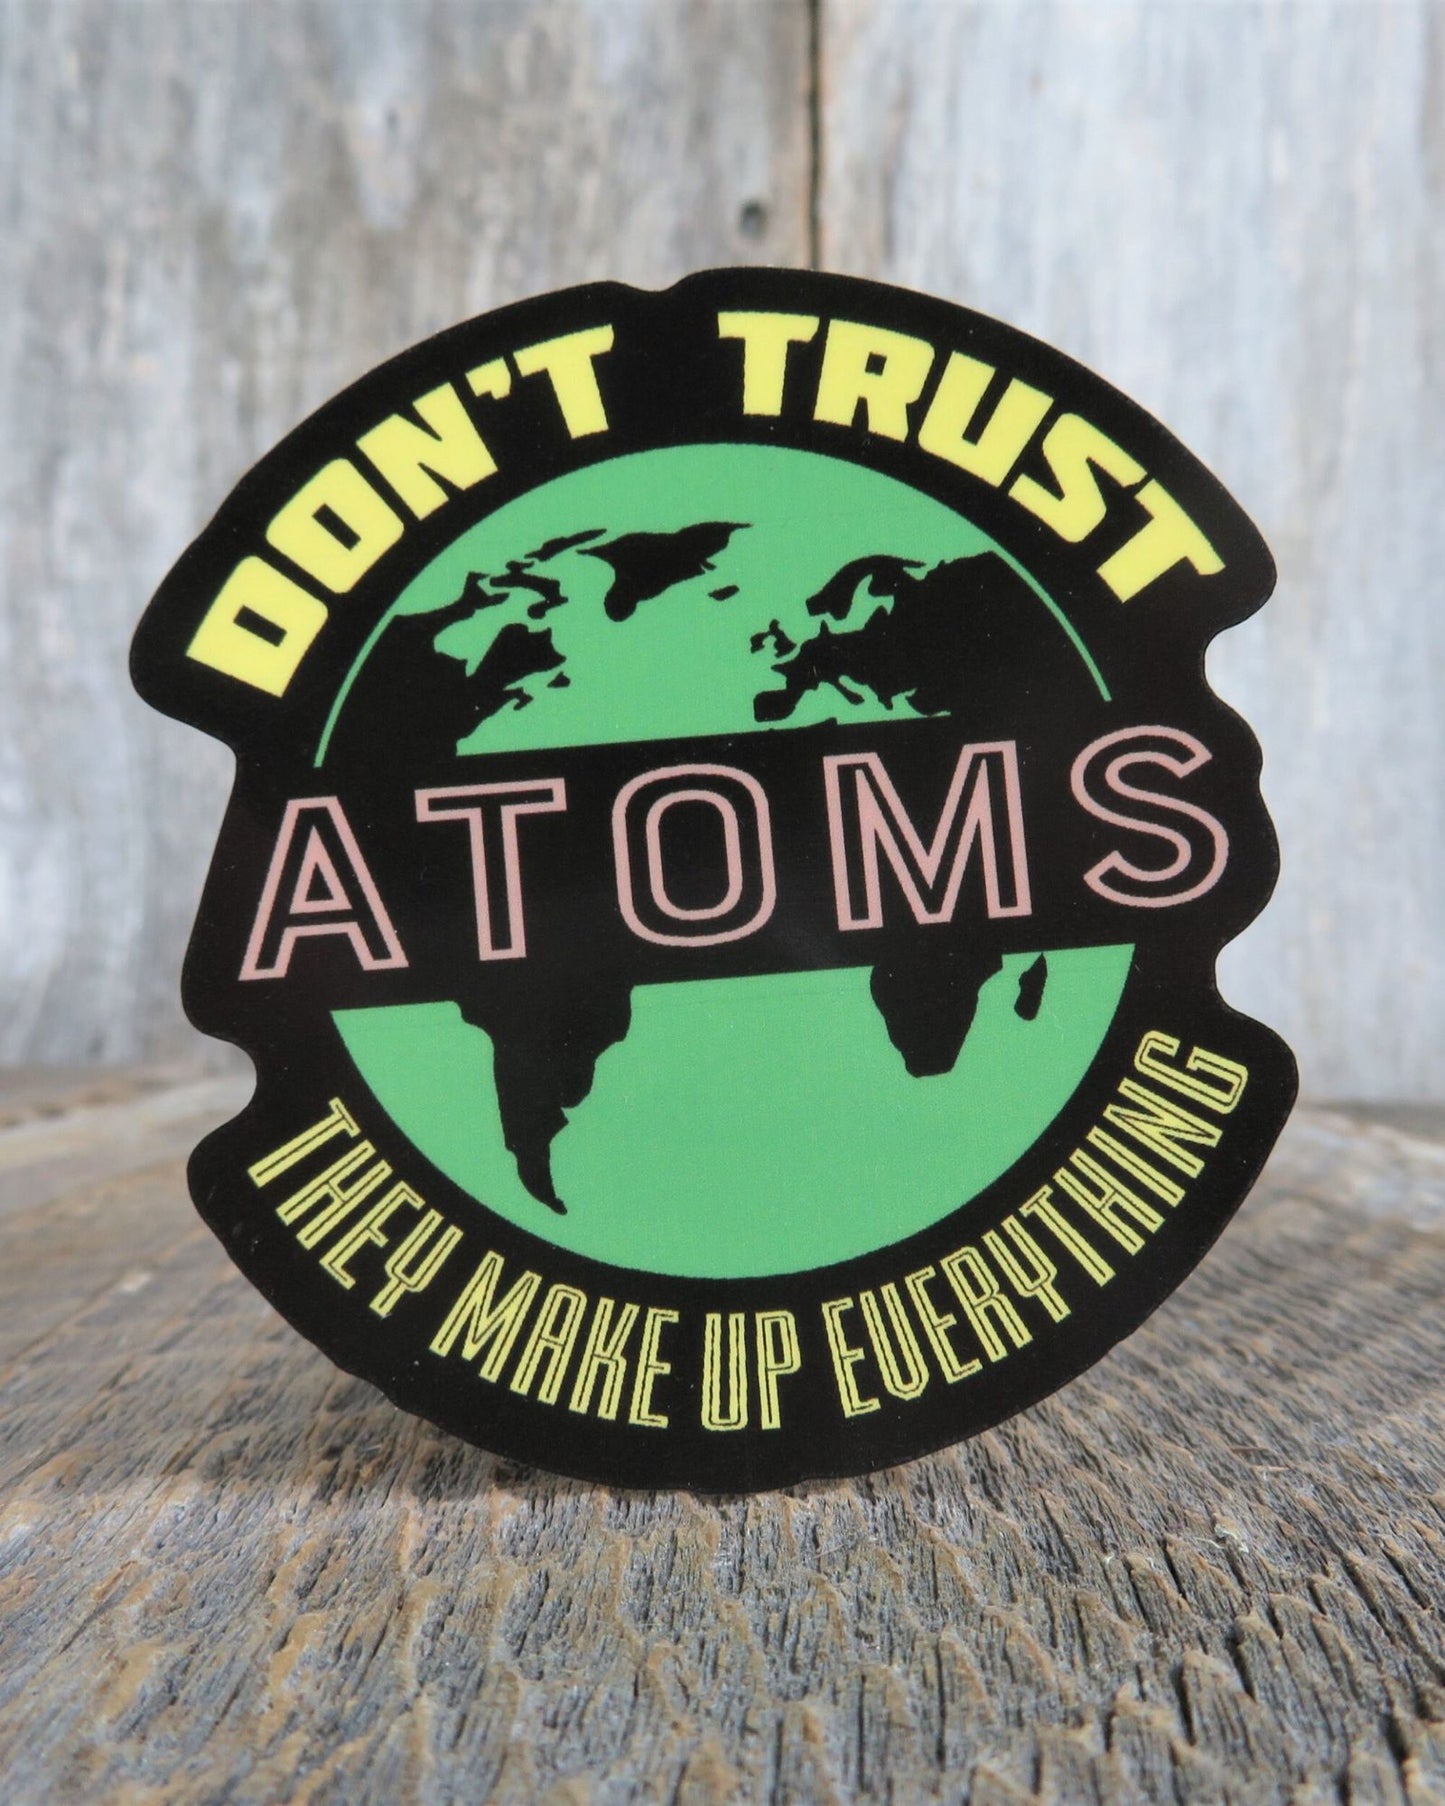 Don't Trust Atoms The Make Up Everything Sticker Funny Science Waterproof Geek Humor Water Bottle Laptop